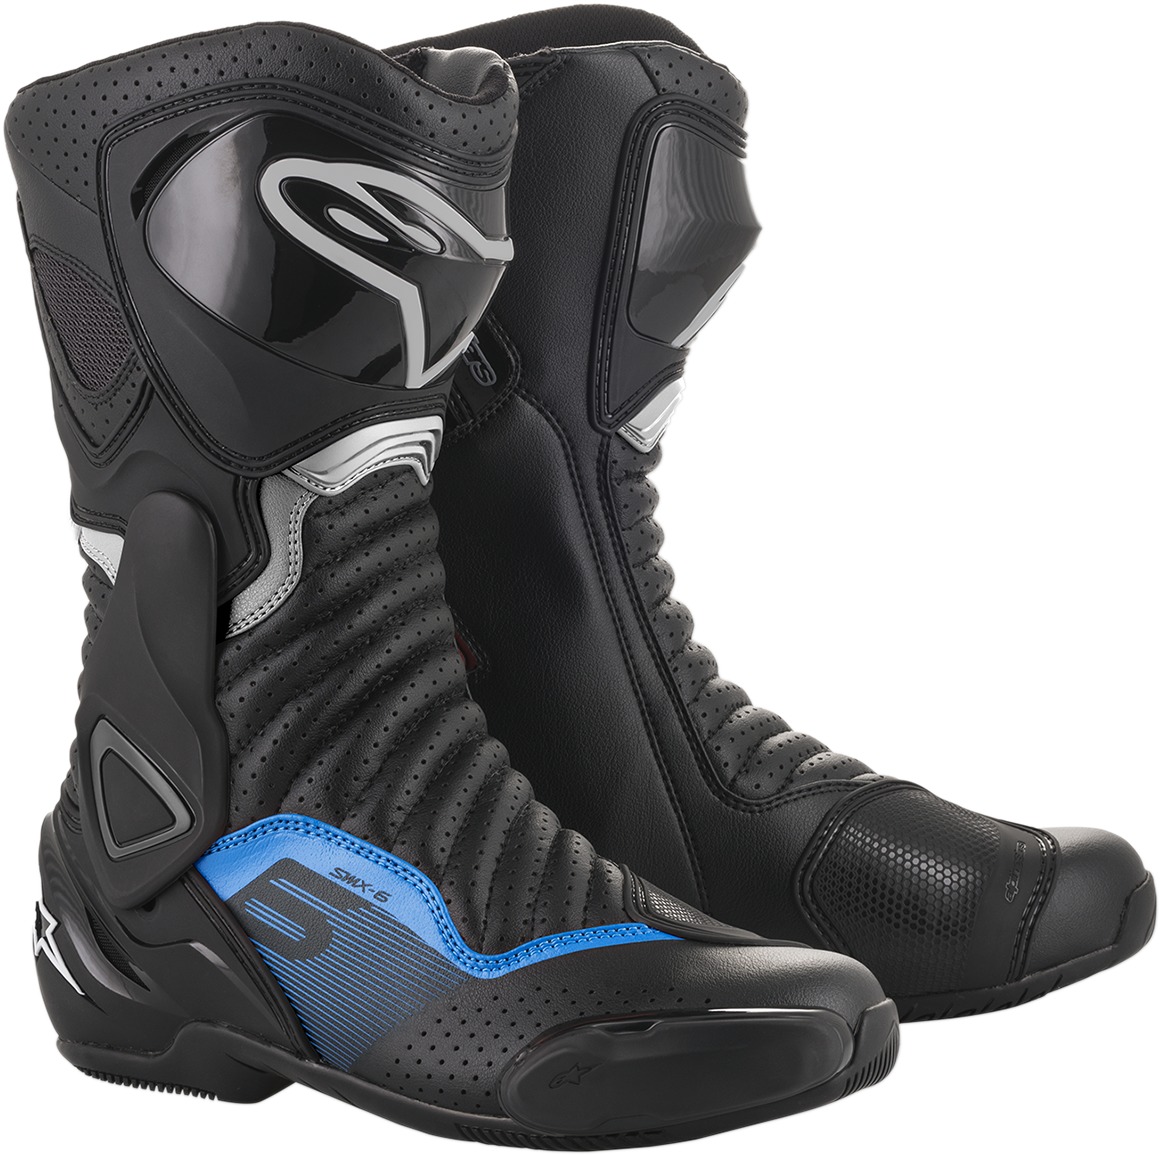 SMX-6 v2 Street Riding Boots Black/Blue/Gray/White US 13.5 - Click Image to Close